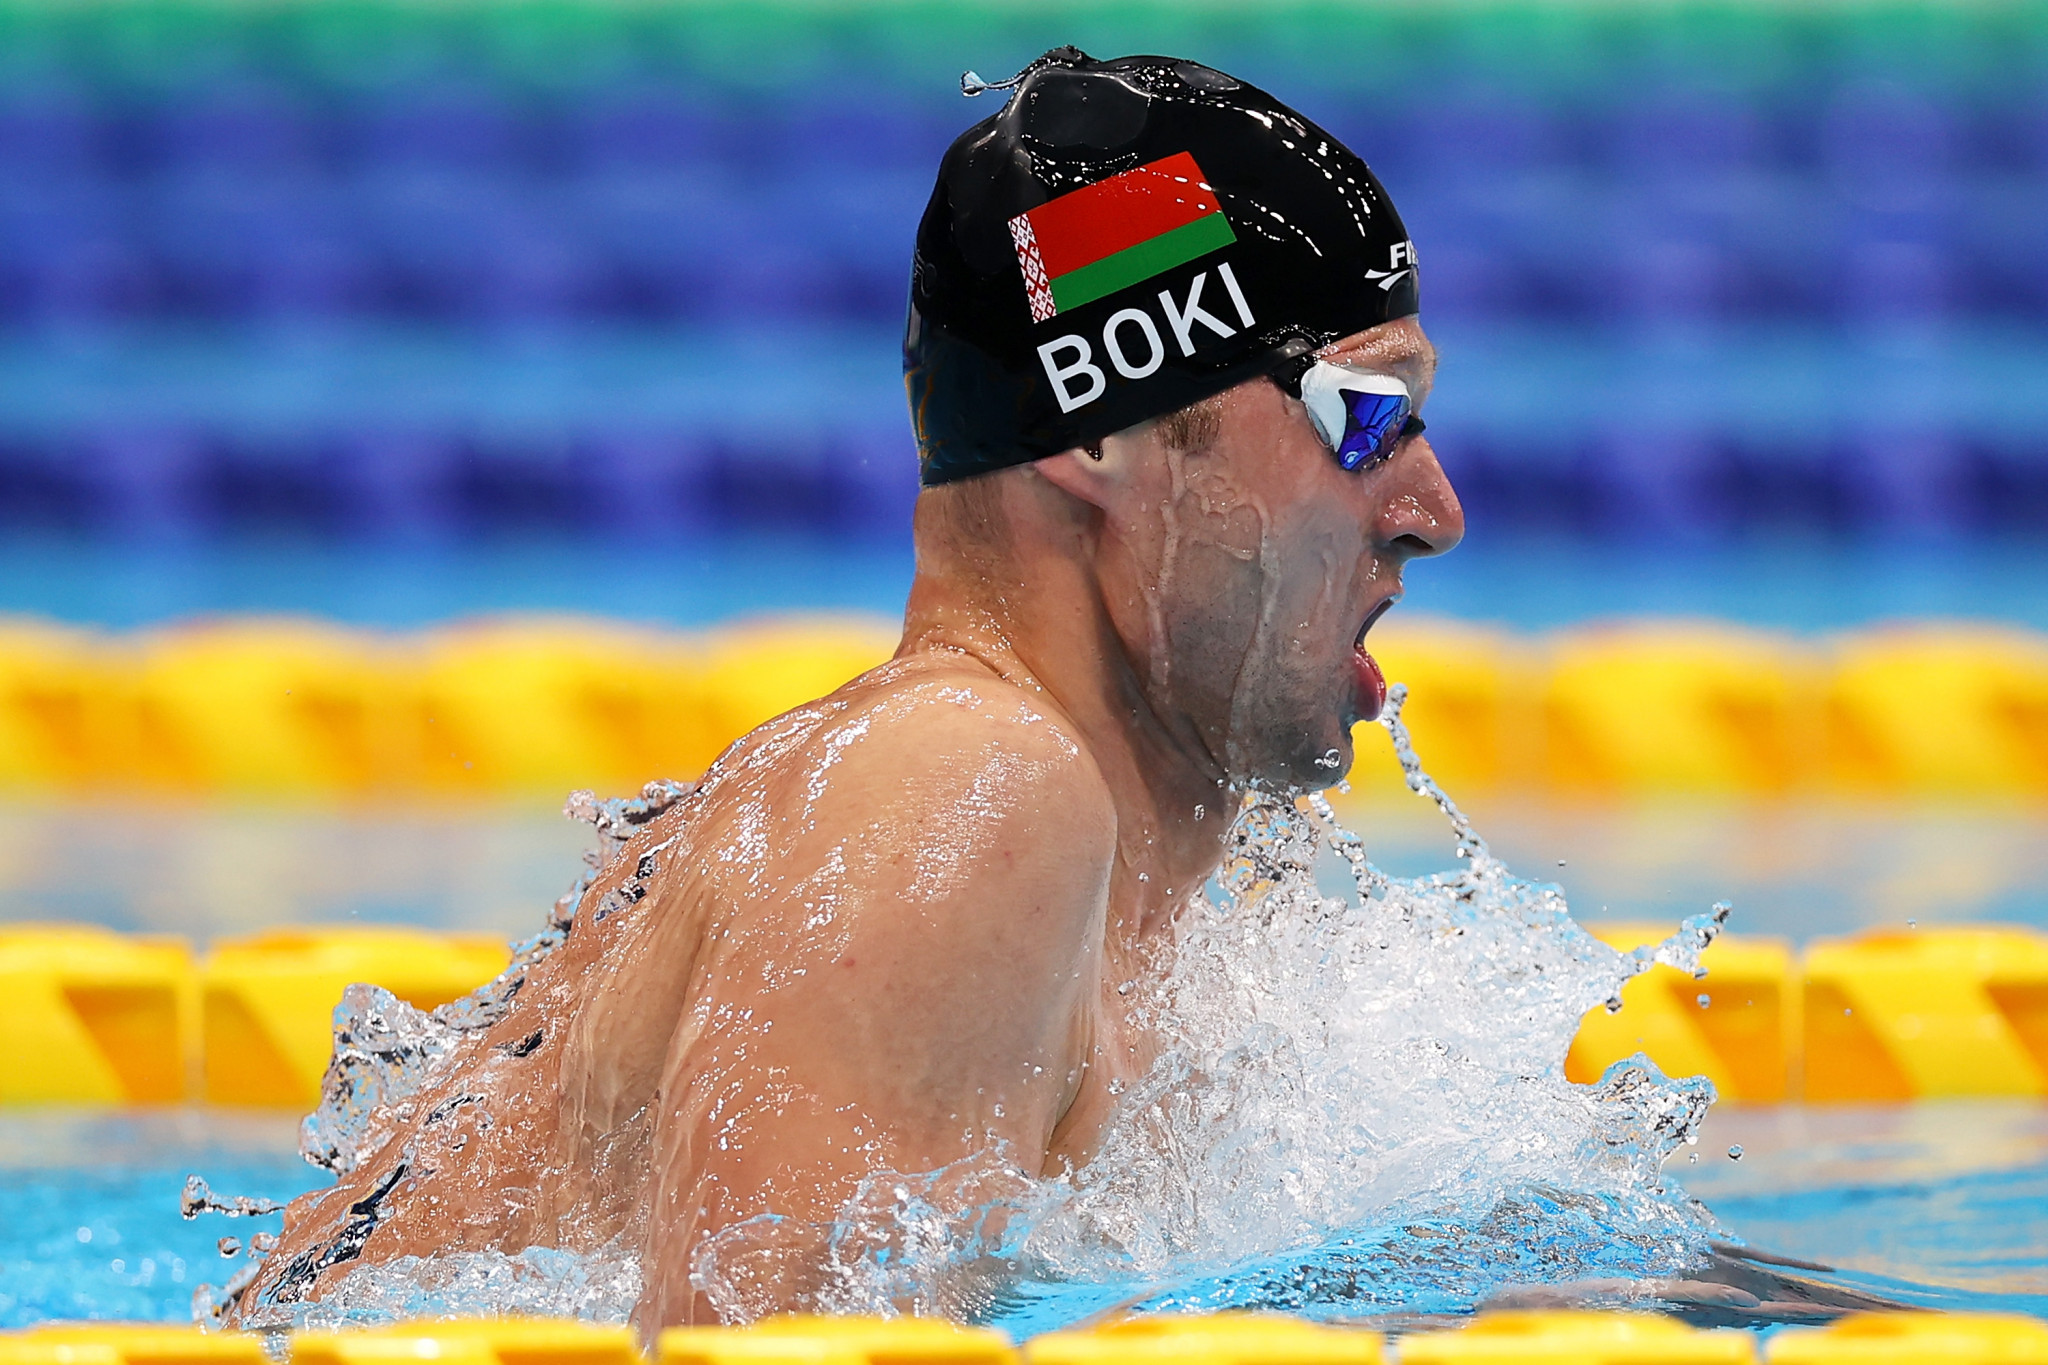 Belarus' Ihar Boki won his fifth gold medal of the Tokyo 2020 Paralympics ©Getty Images